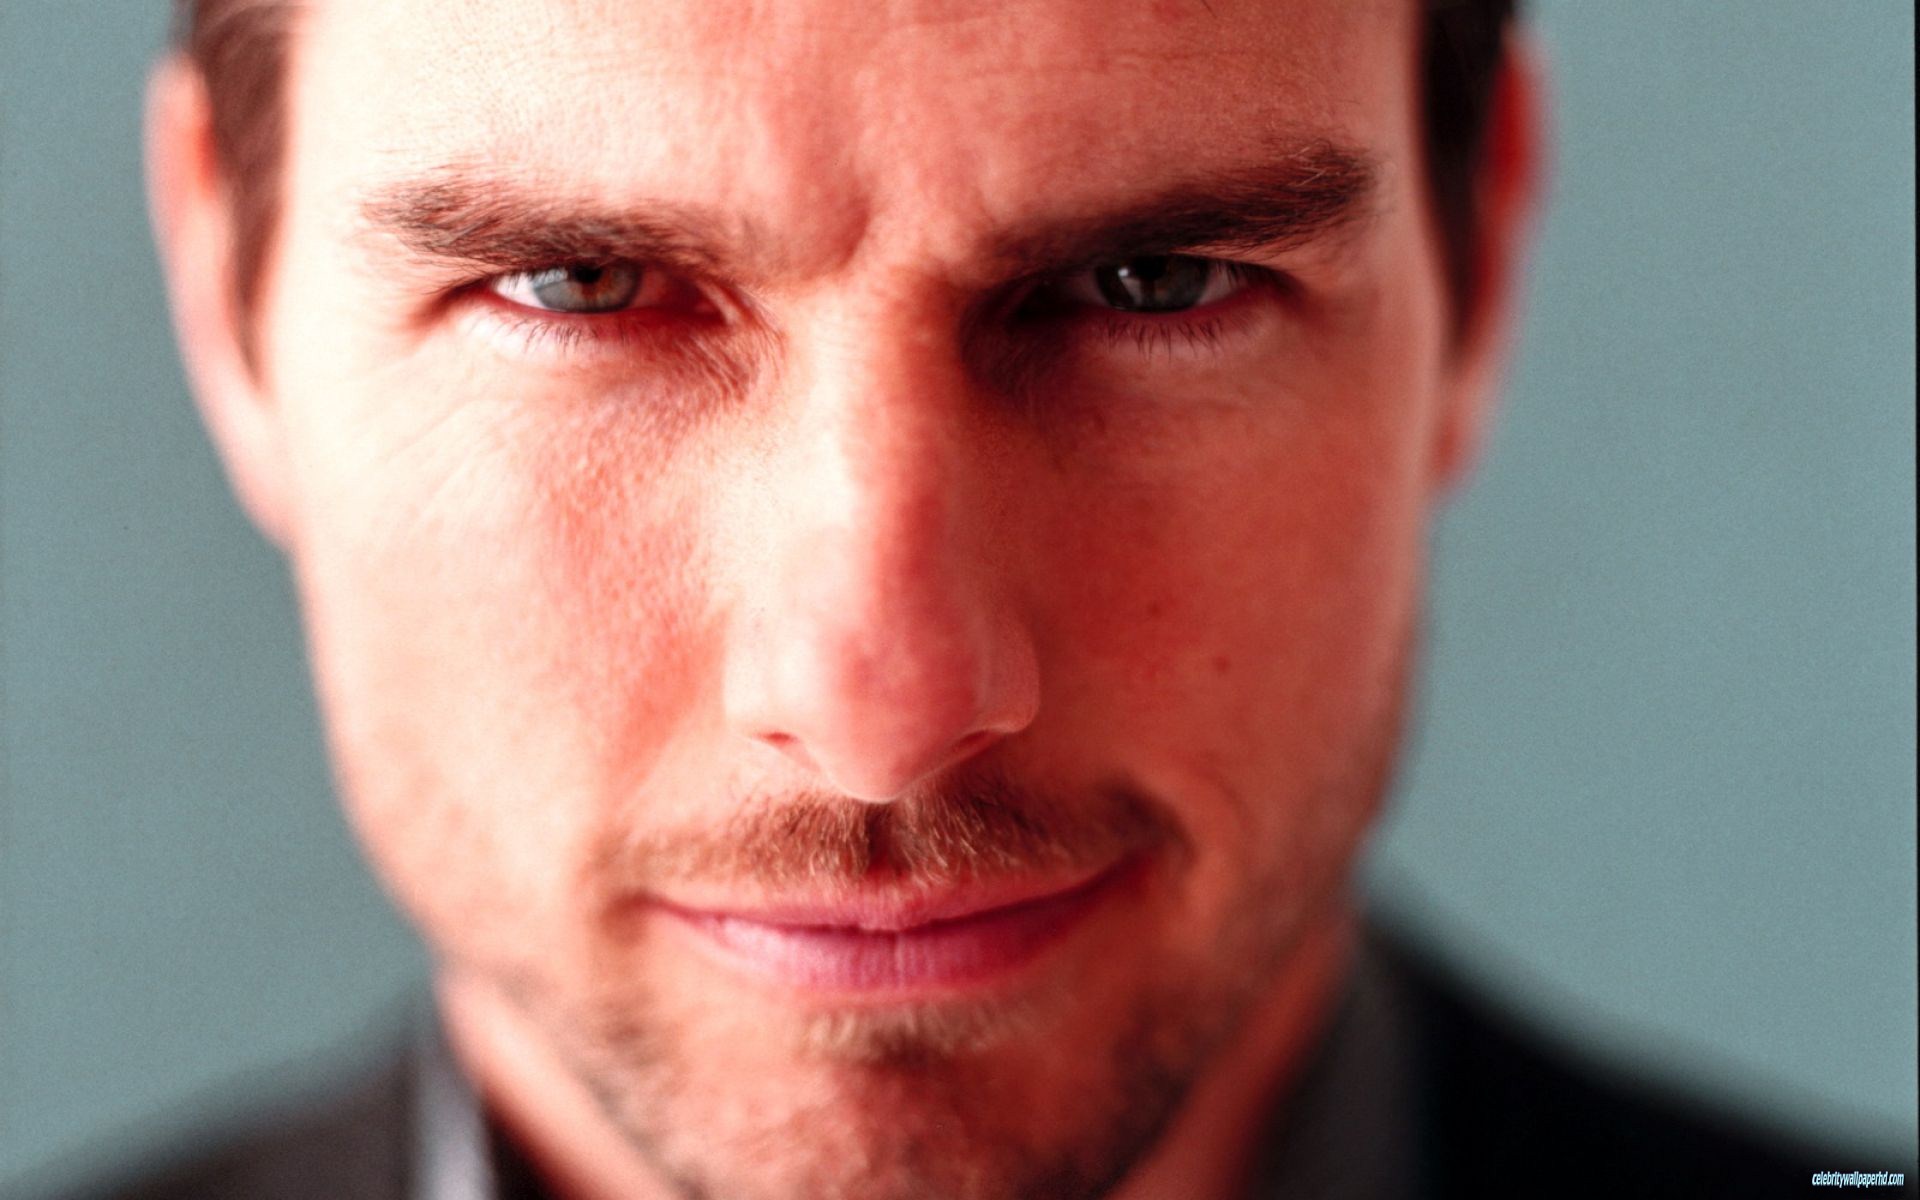 Tom Cruise Eyes Wallpaper - Close Up Of A Face - HD Wallpaper 